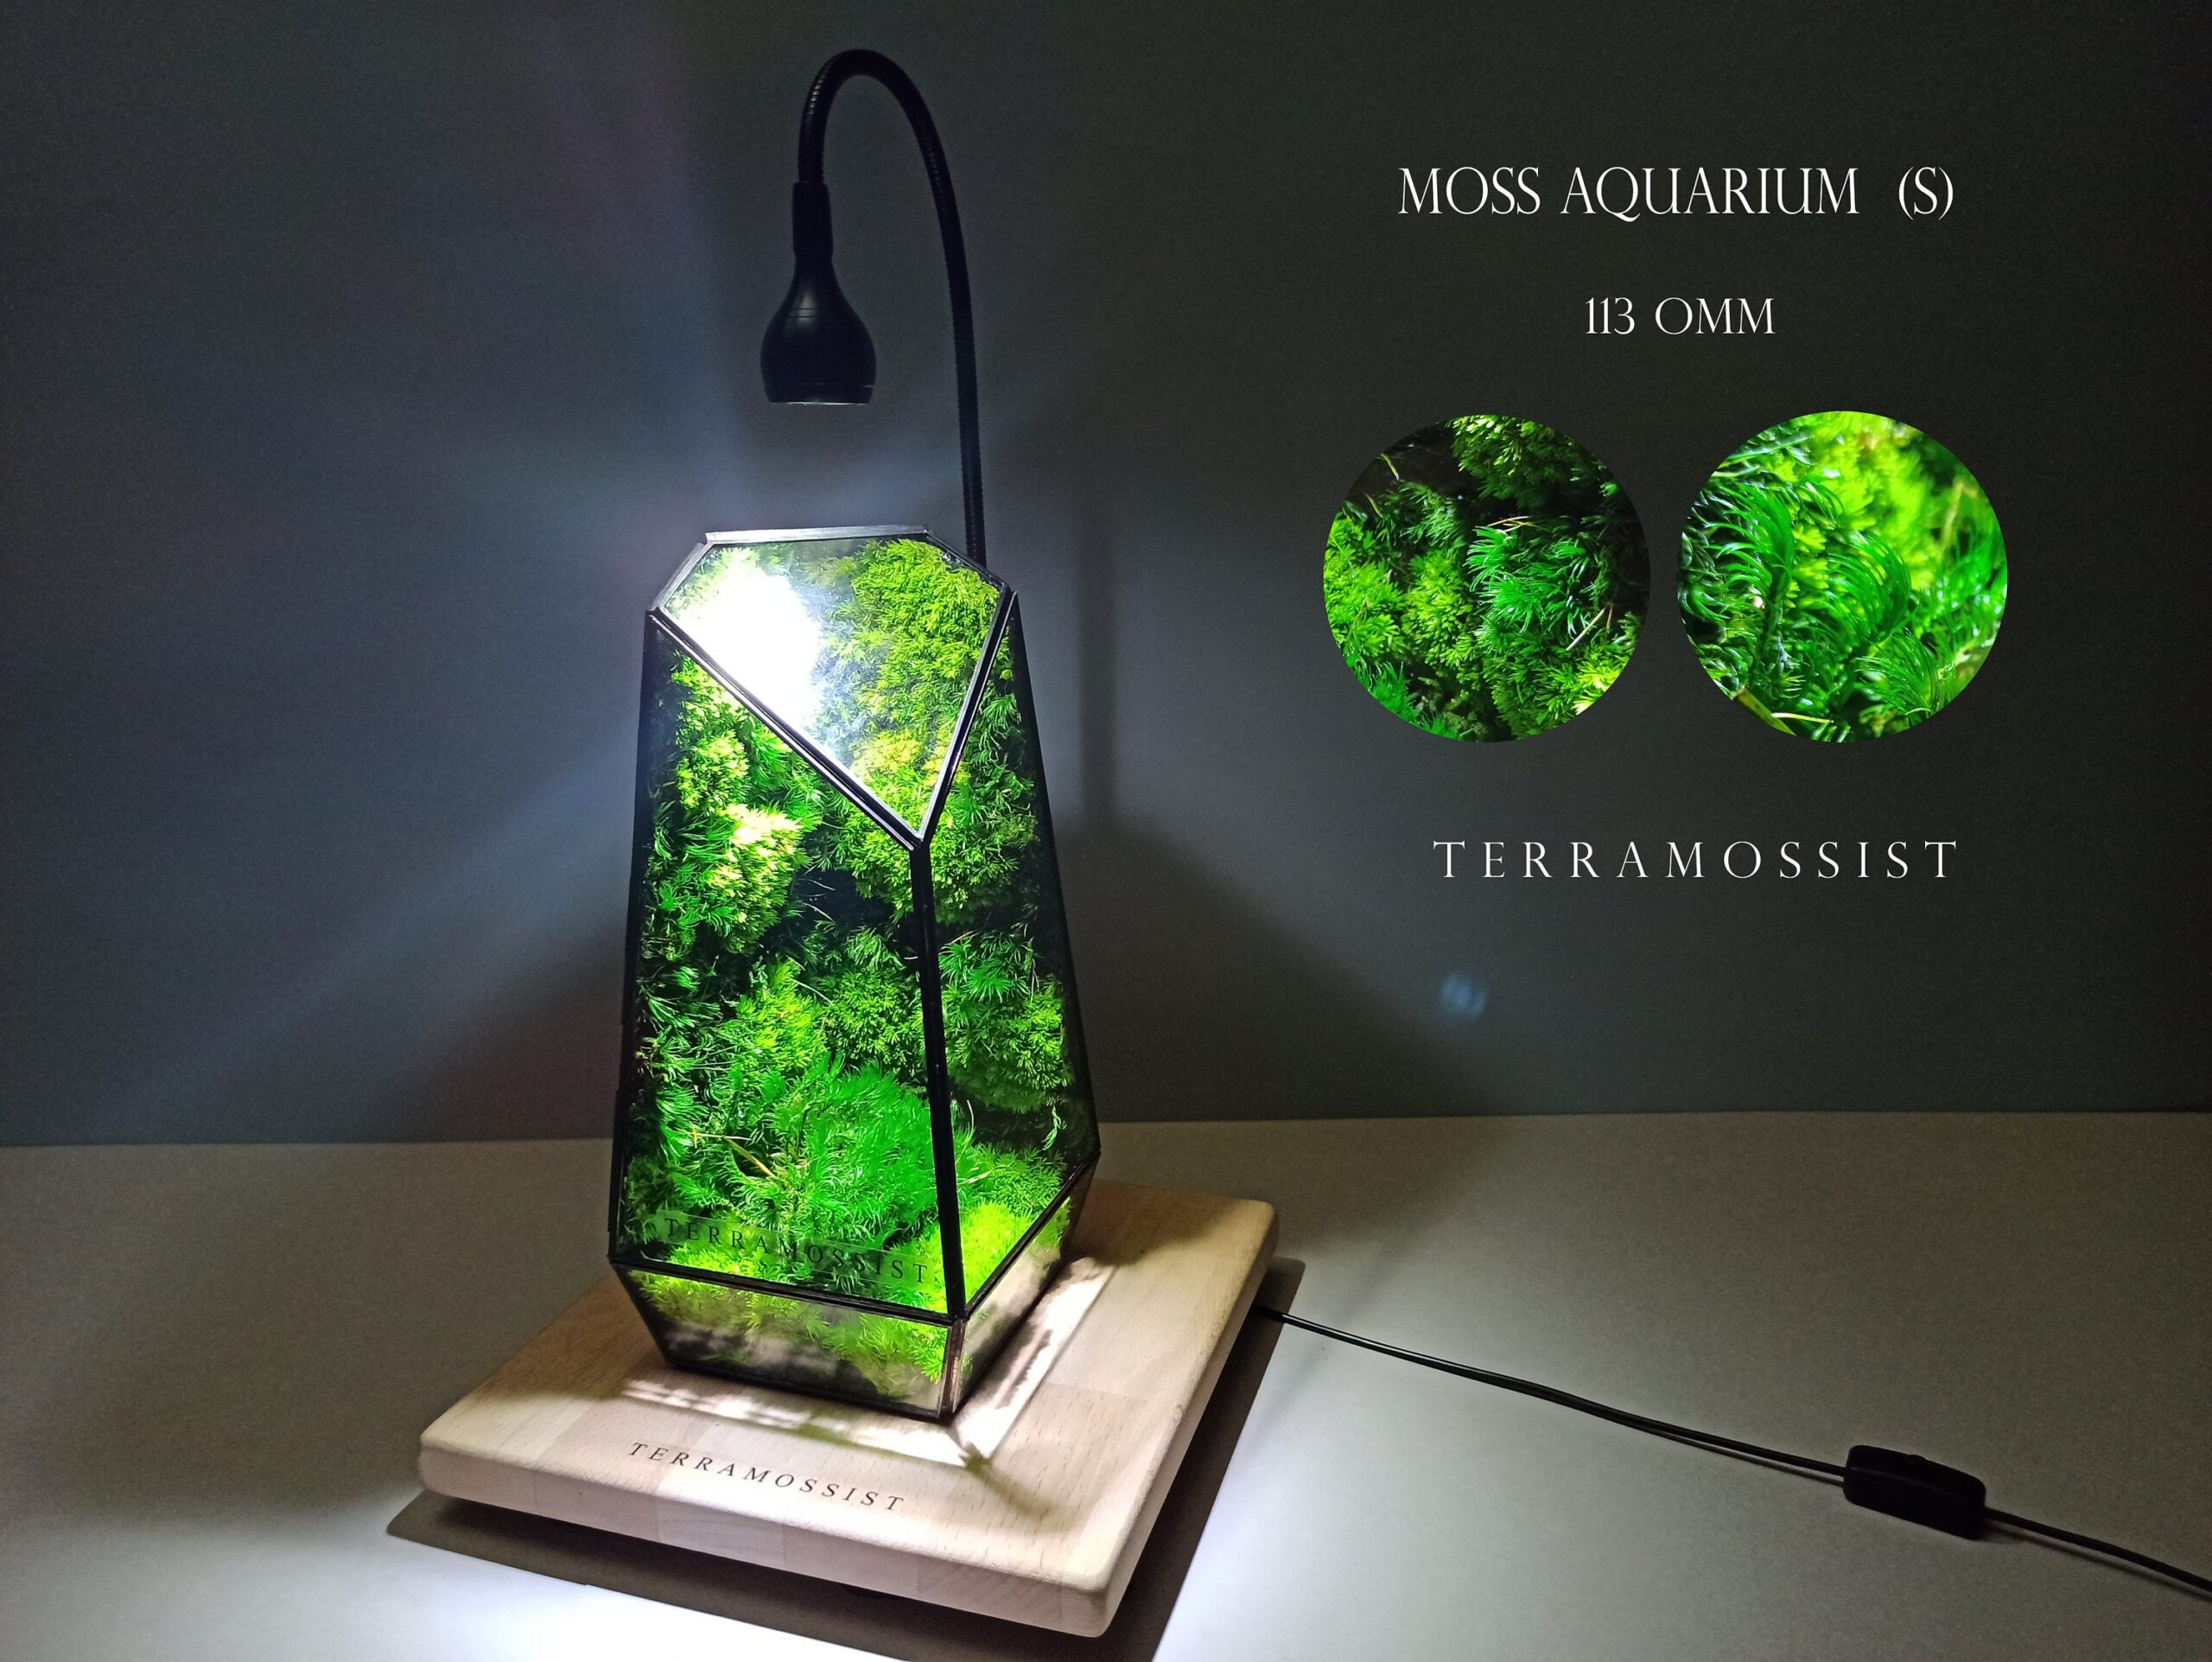 https://terrariumcreations.com/wp-content/uploads/2023/01/Decor-Home-Art-Ready-To-Fly-The-Vertex-Kit-Preserved-Moss-Glass-Visuel-Relaxation-Terrarium-Exclusive-Design-By-Terramossist-Gallery-5-scaled.jpg